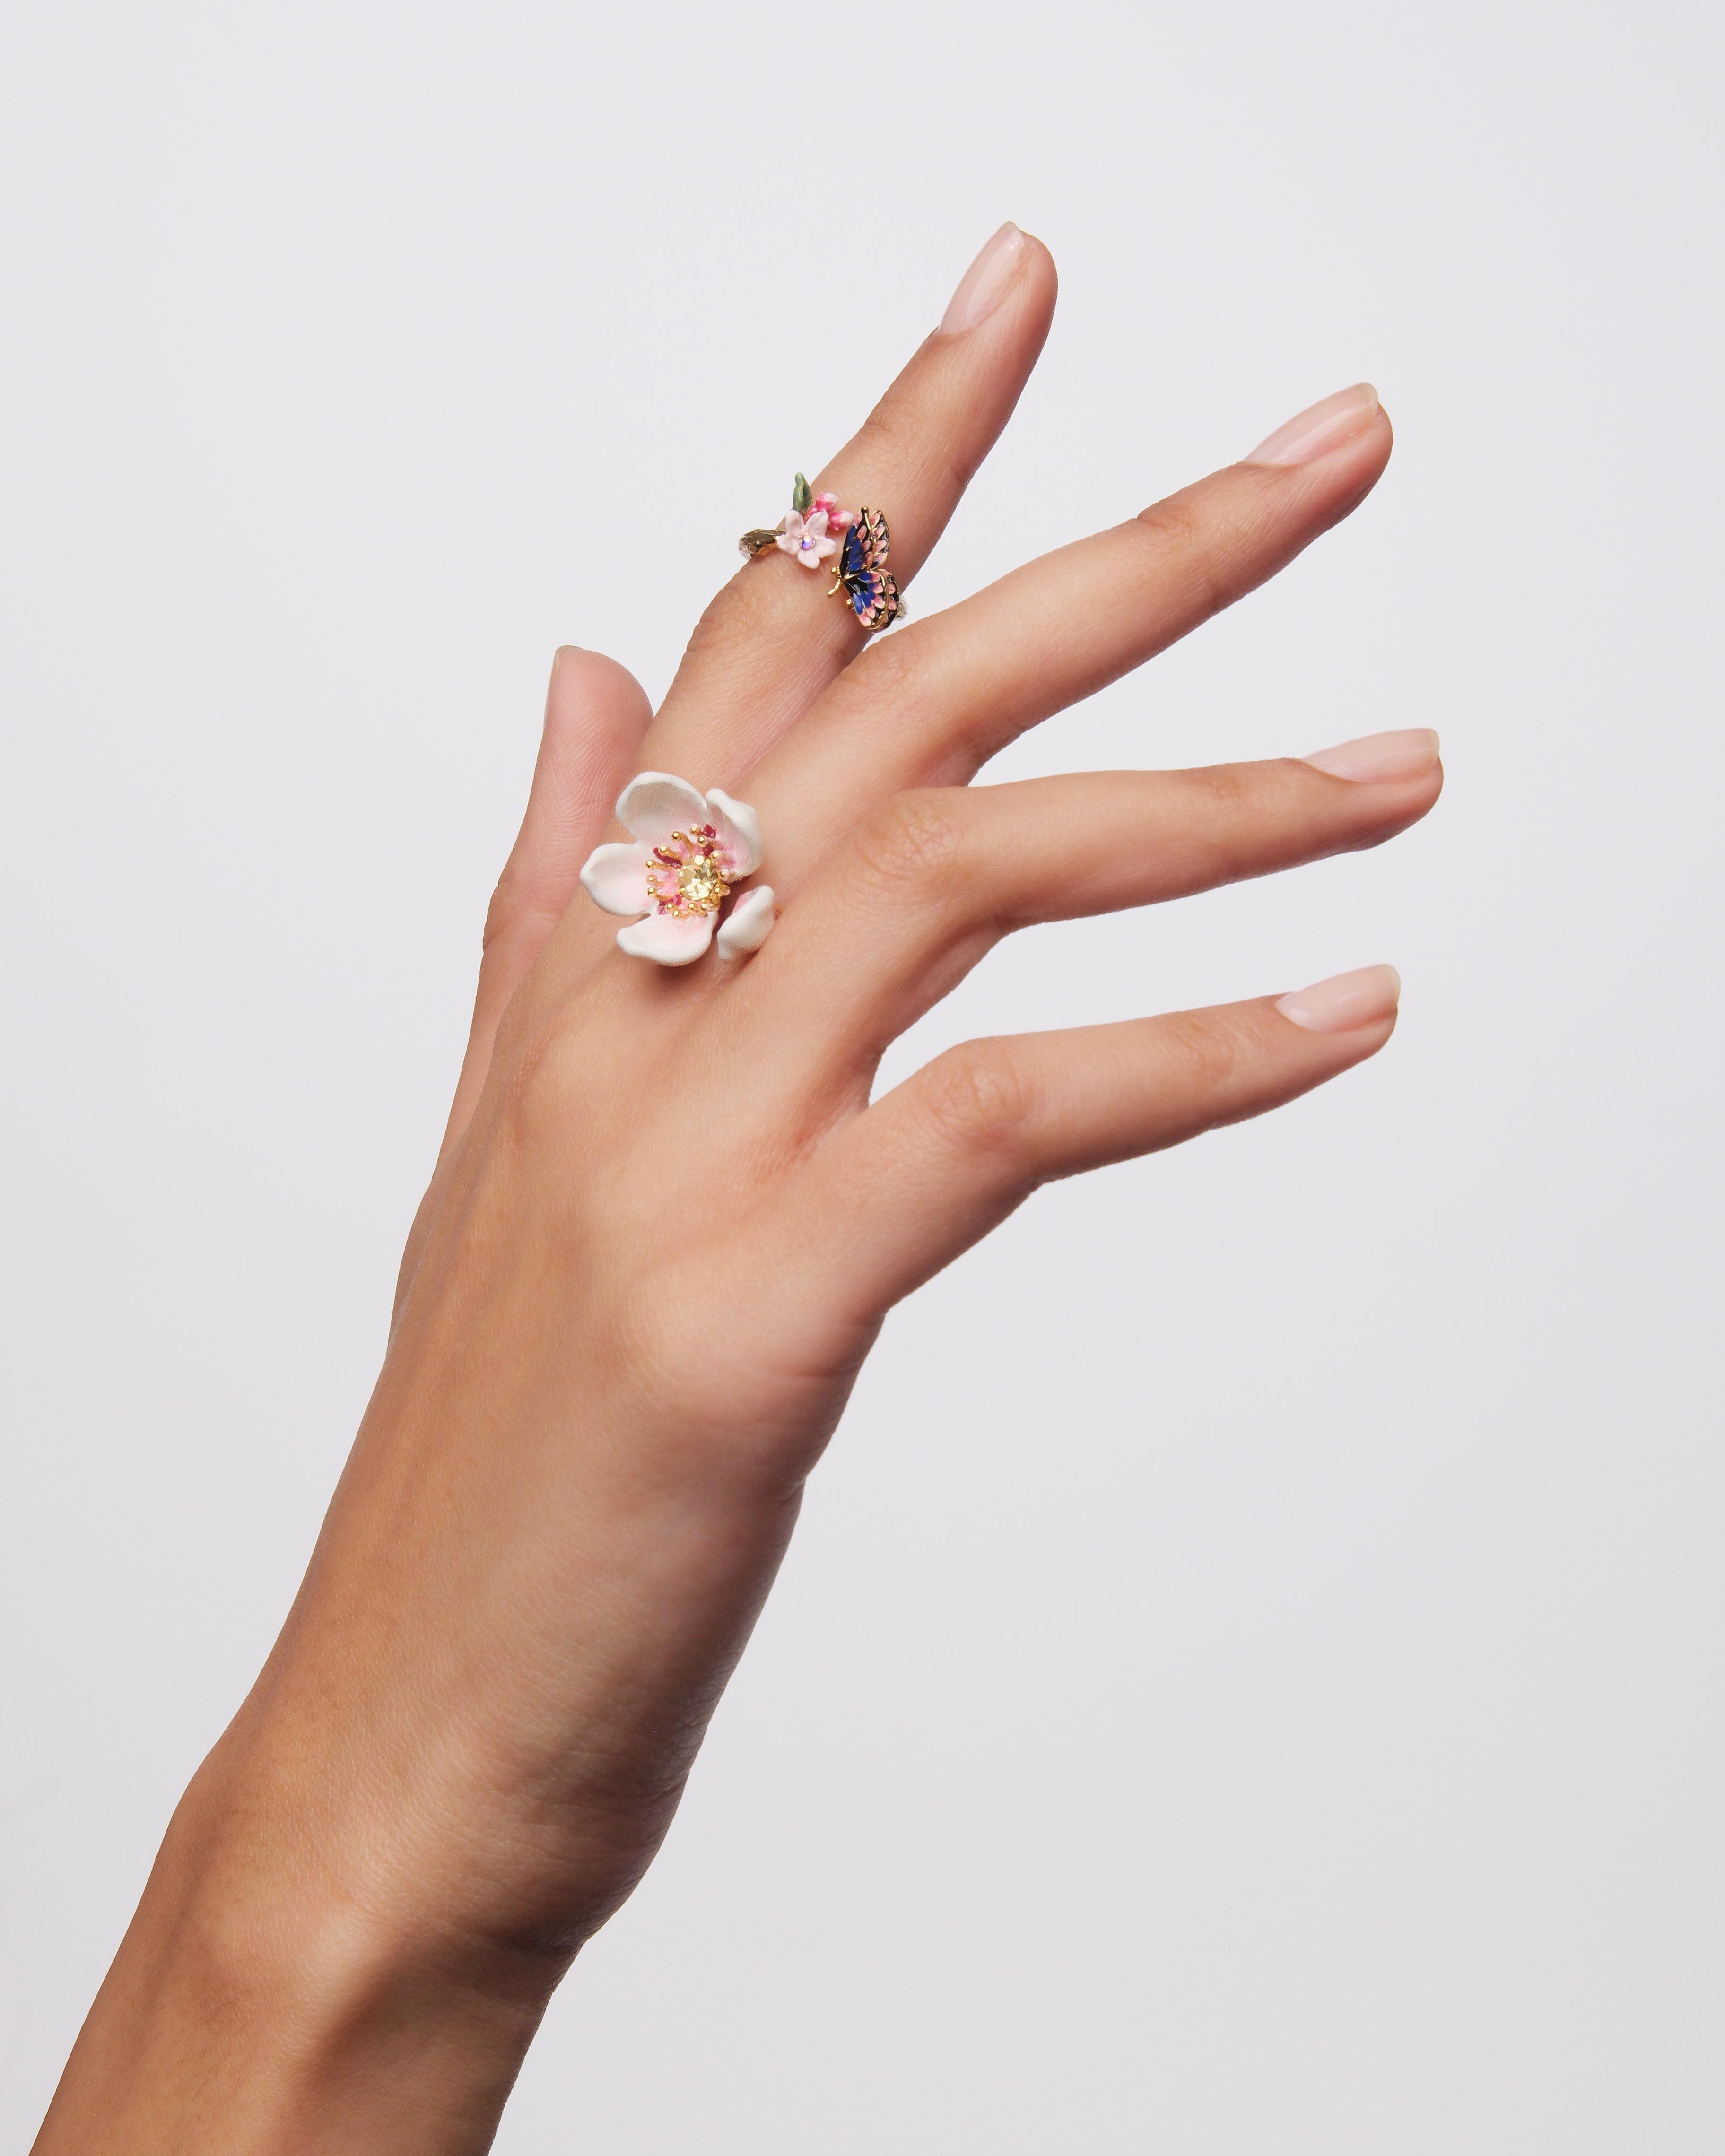 Japanese emperor butterfly and cherry blossom adjustable ring